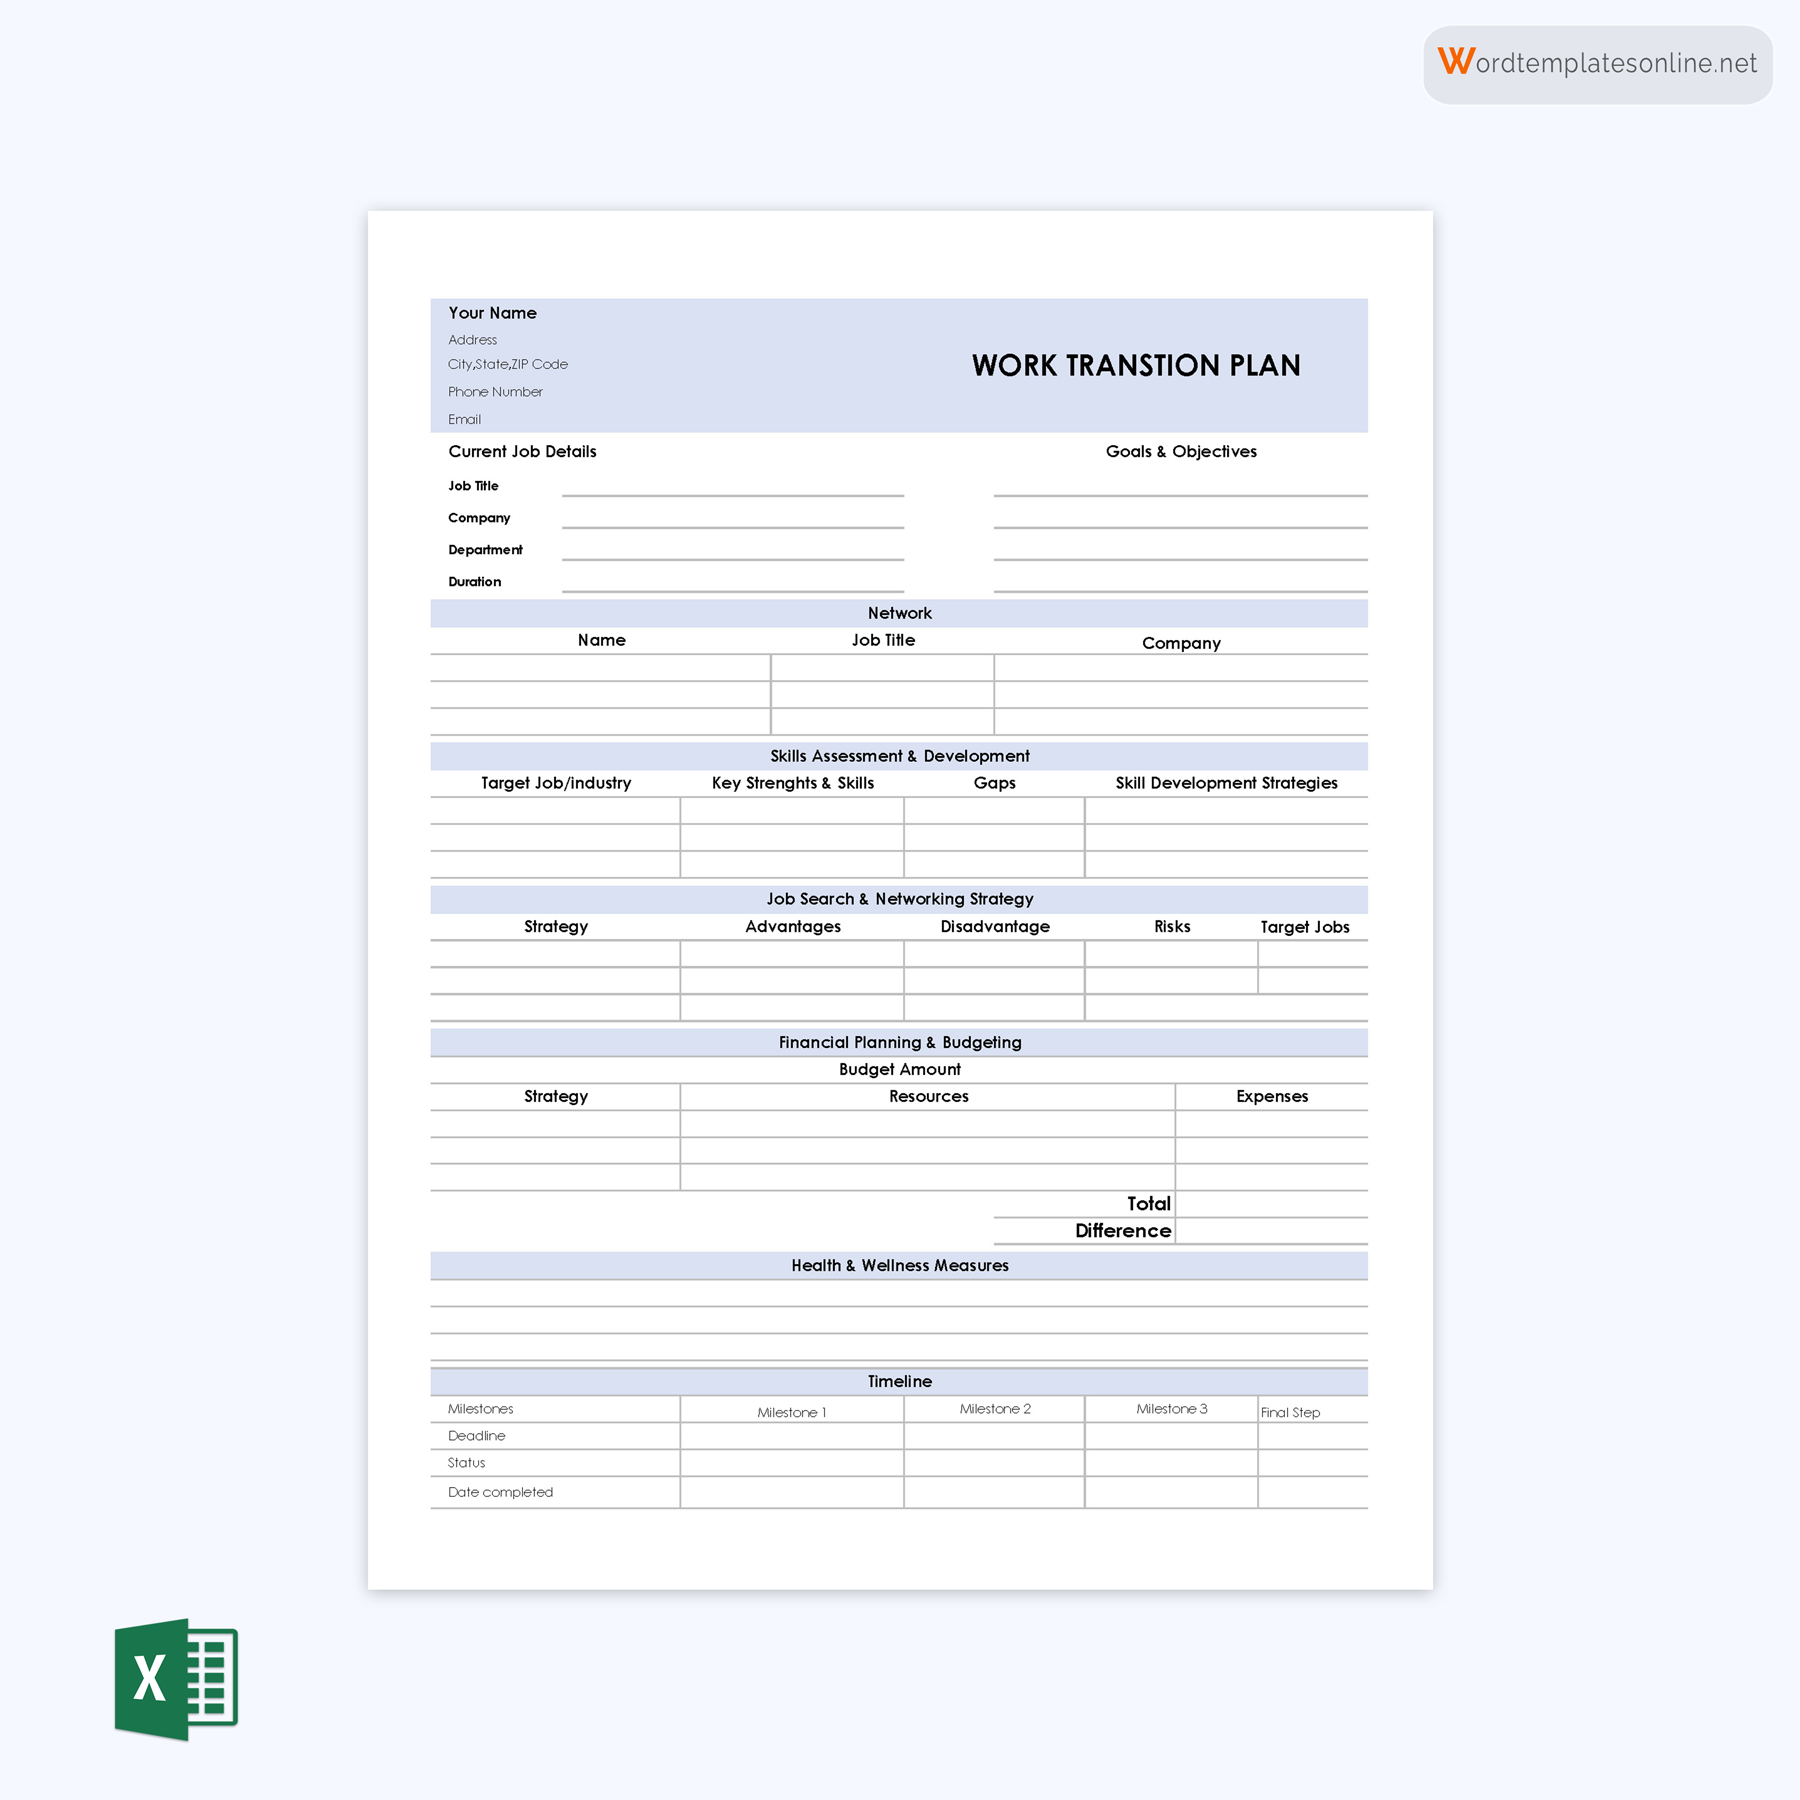 Work Transition Plan Template Free Download in Ms Excel